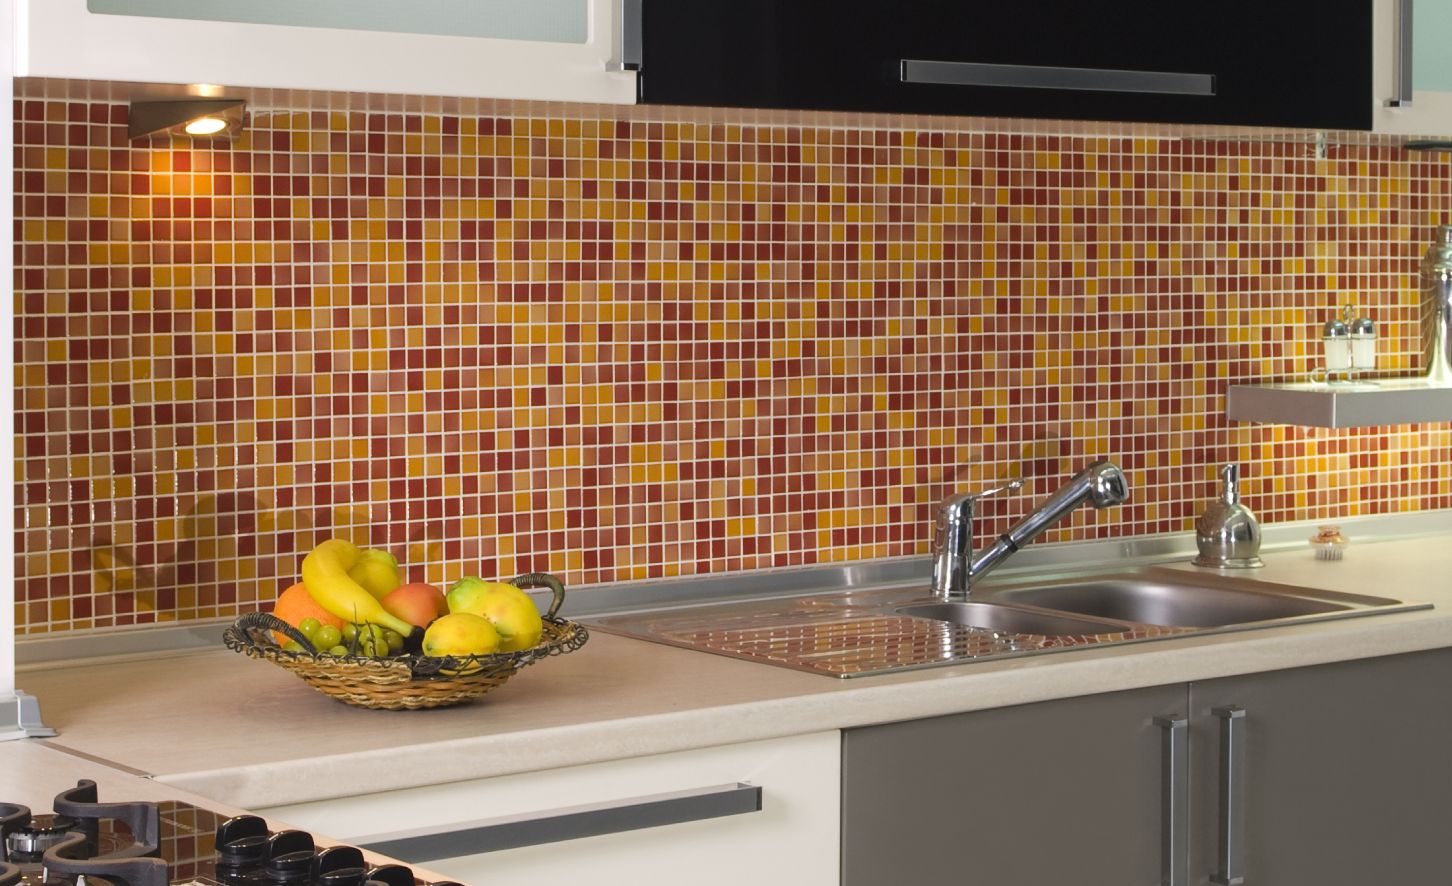 White Brick Tile Backsplash Kitchen Beautiful Guide to Wall and Floor Tile Sizes